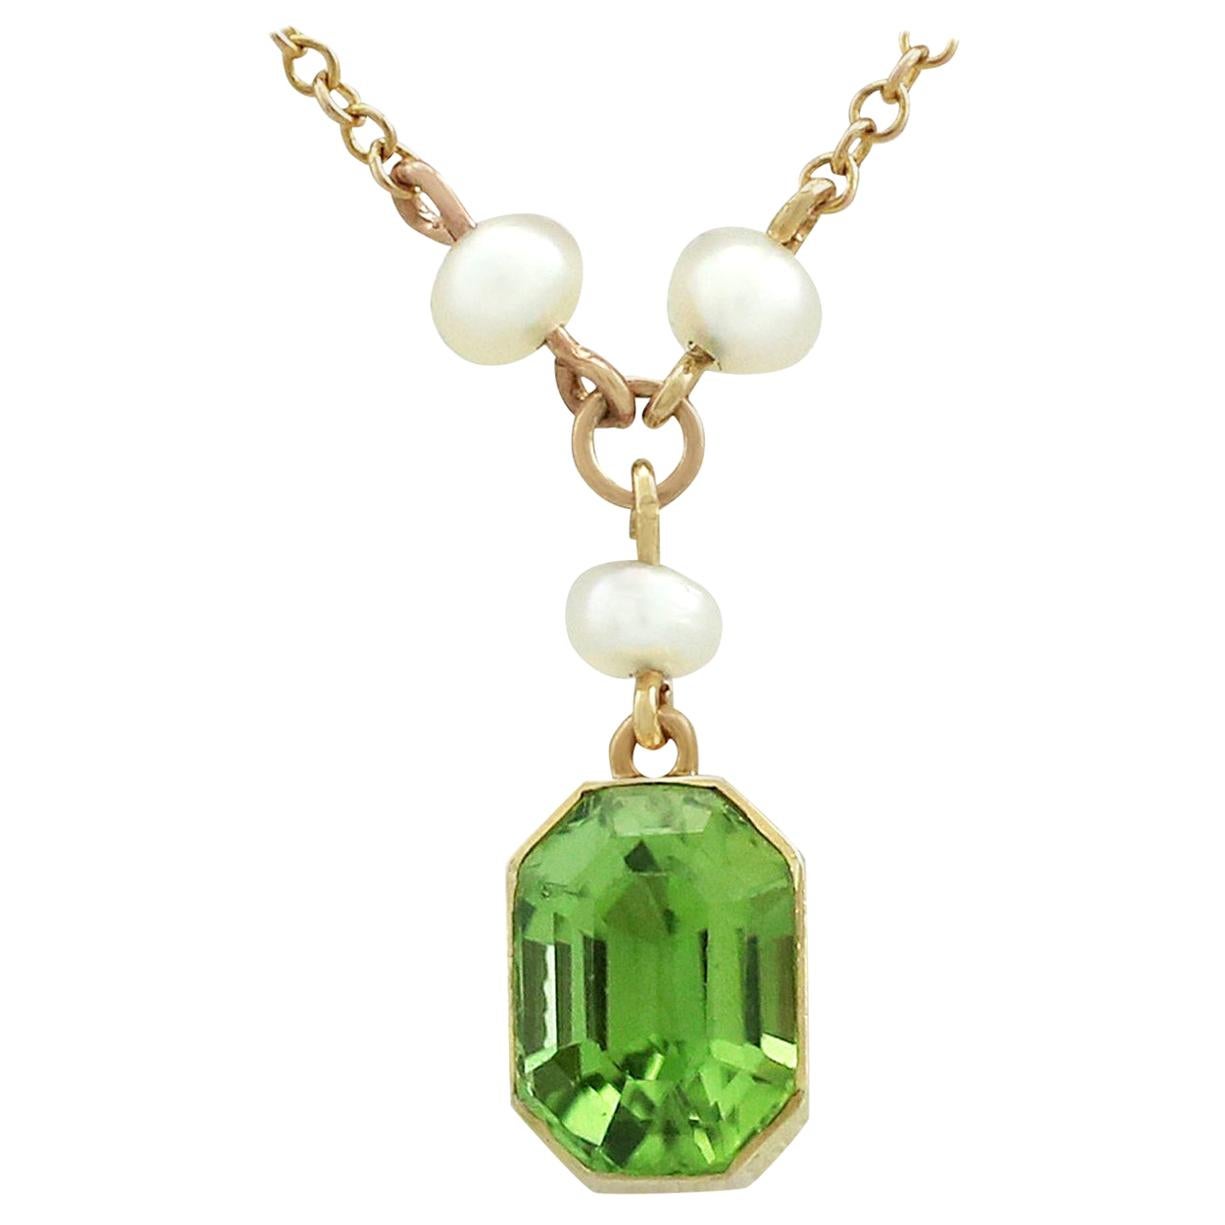 Antique 3.16 Carat Peridot and Seed Pearl Yellow Gold Pendant